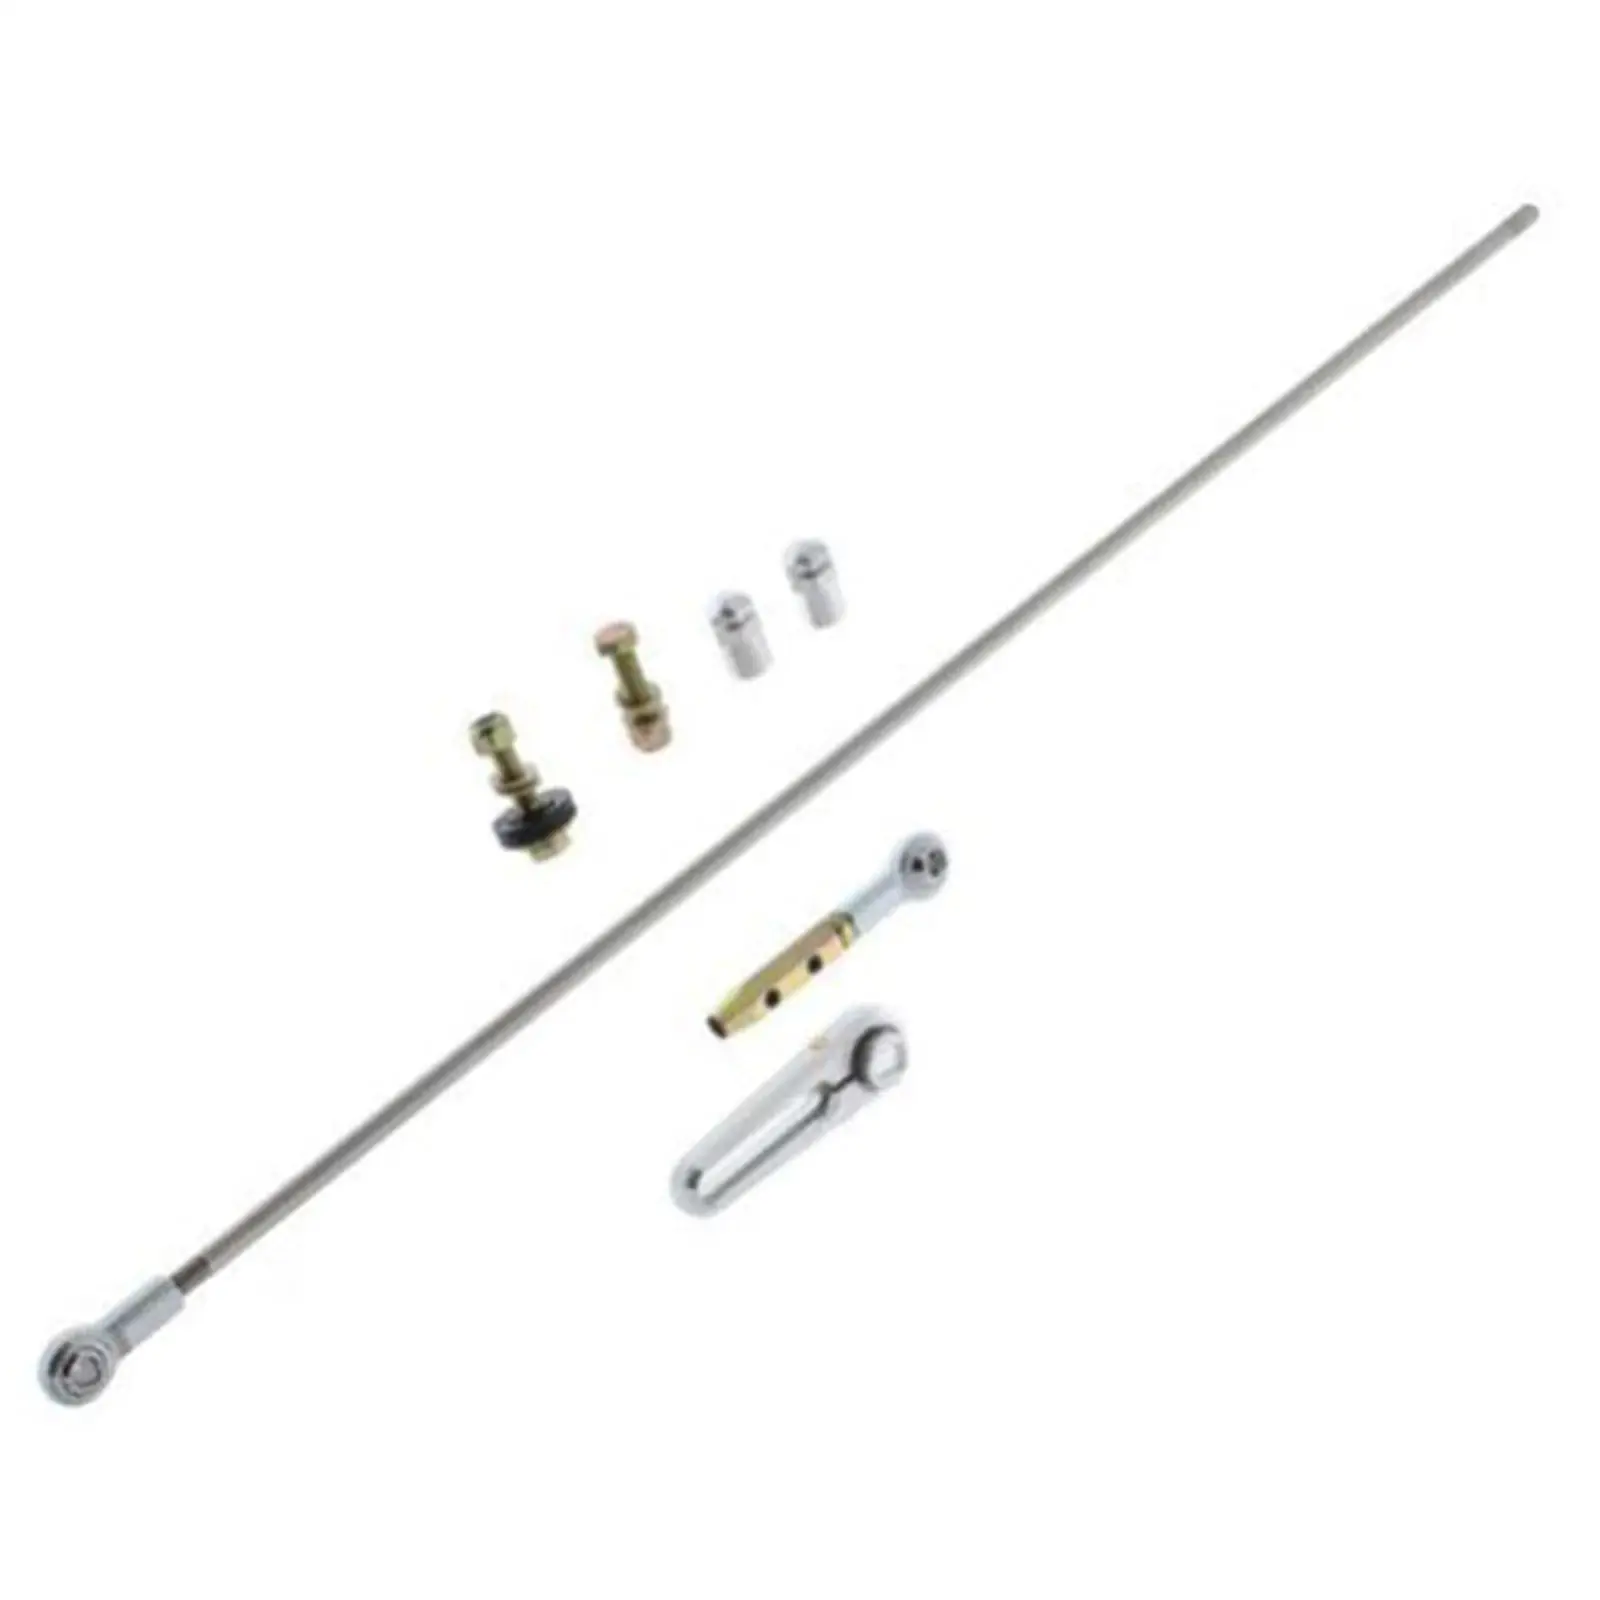 Transmission Column Shift Linkage Kit Replacement for GM 700R4 4L60